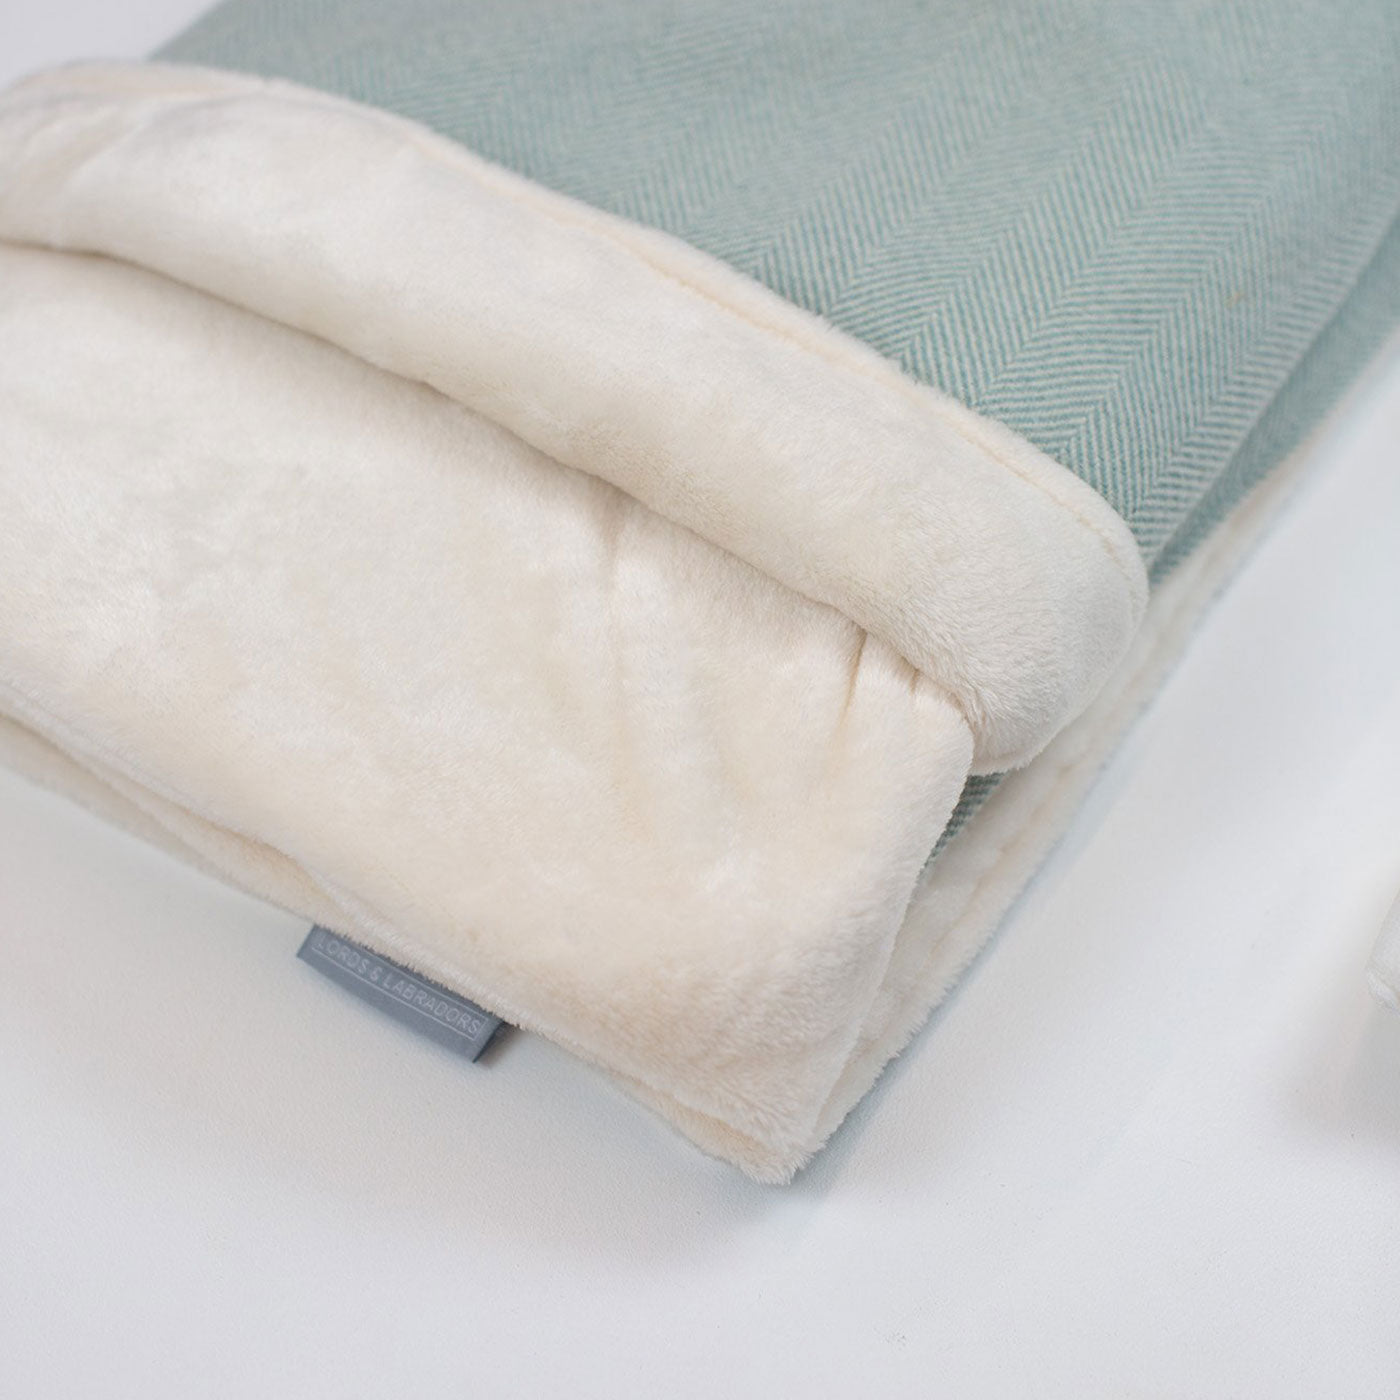 [color:duck Egg Herringbone] Super Soft Sherpa & Teddy Fleece Lining, Our Luxury Cat & Kitten Blanket In Stunning Duck Egg Herringbone The Perfect Cat Bed Accessory! Available To Personalize at Lords & Labradors US